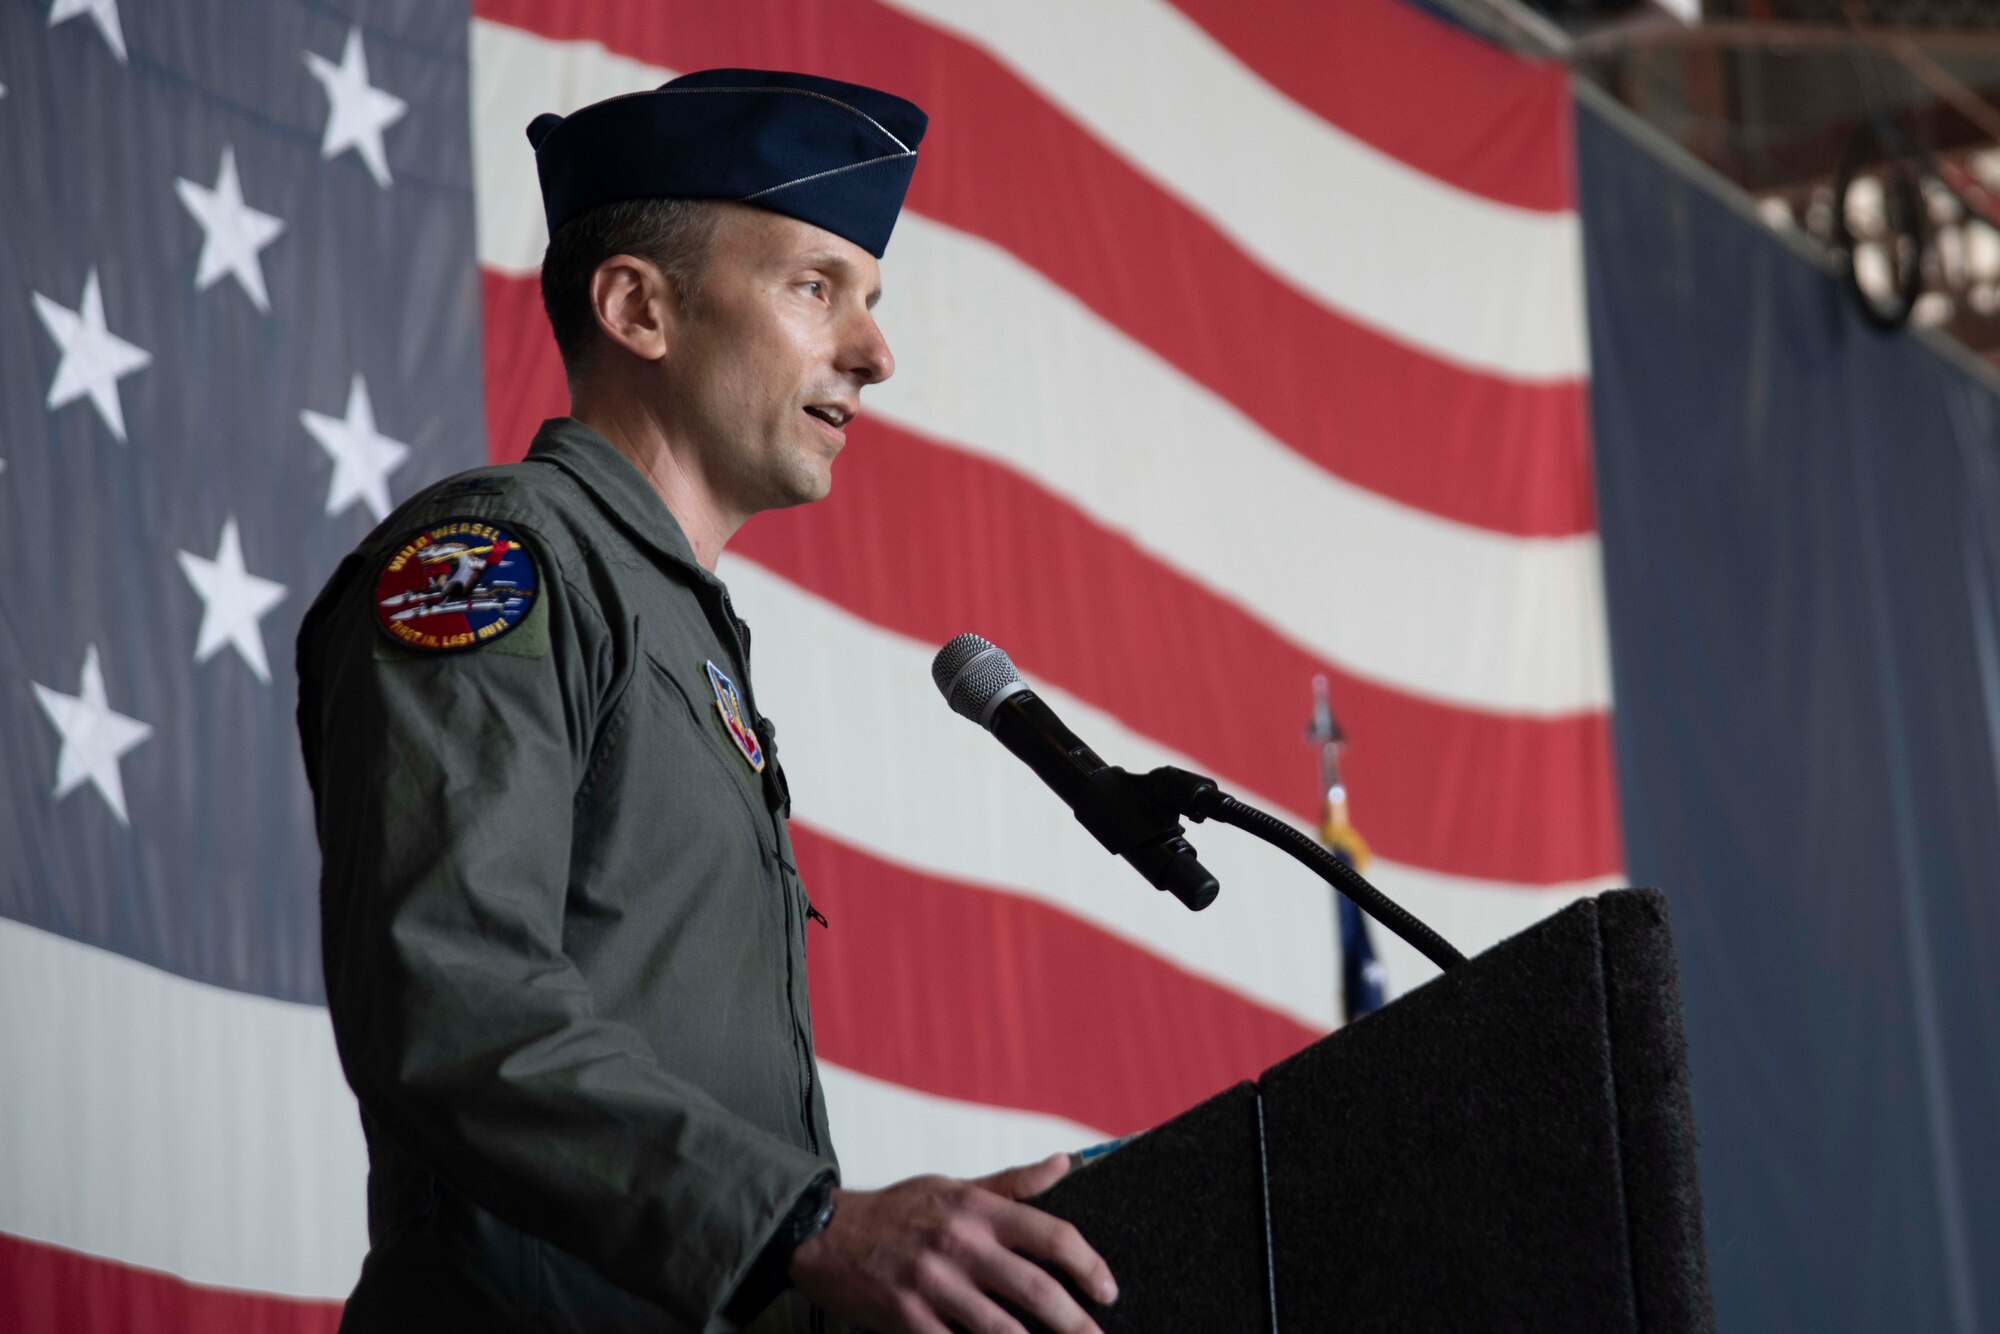 Col. Derek O’Malley, 20th Fighter Wing commander, presided over the ceremony during which Col. Robert Raymond, 20th Operations Group commander, assumed command. (U.S. Air Force photo by Staff Sgt. William Banton)